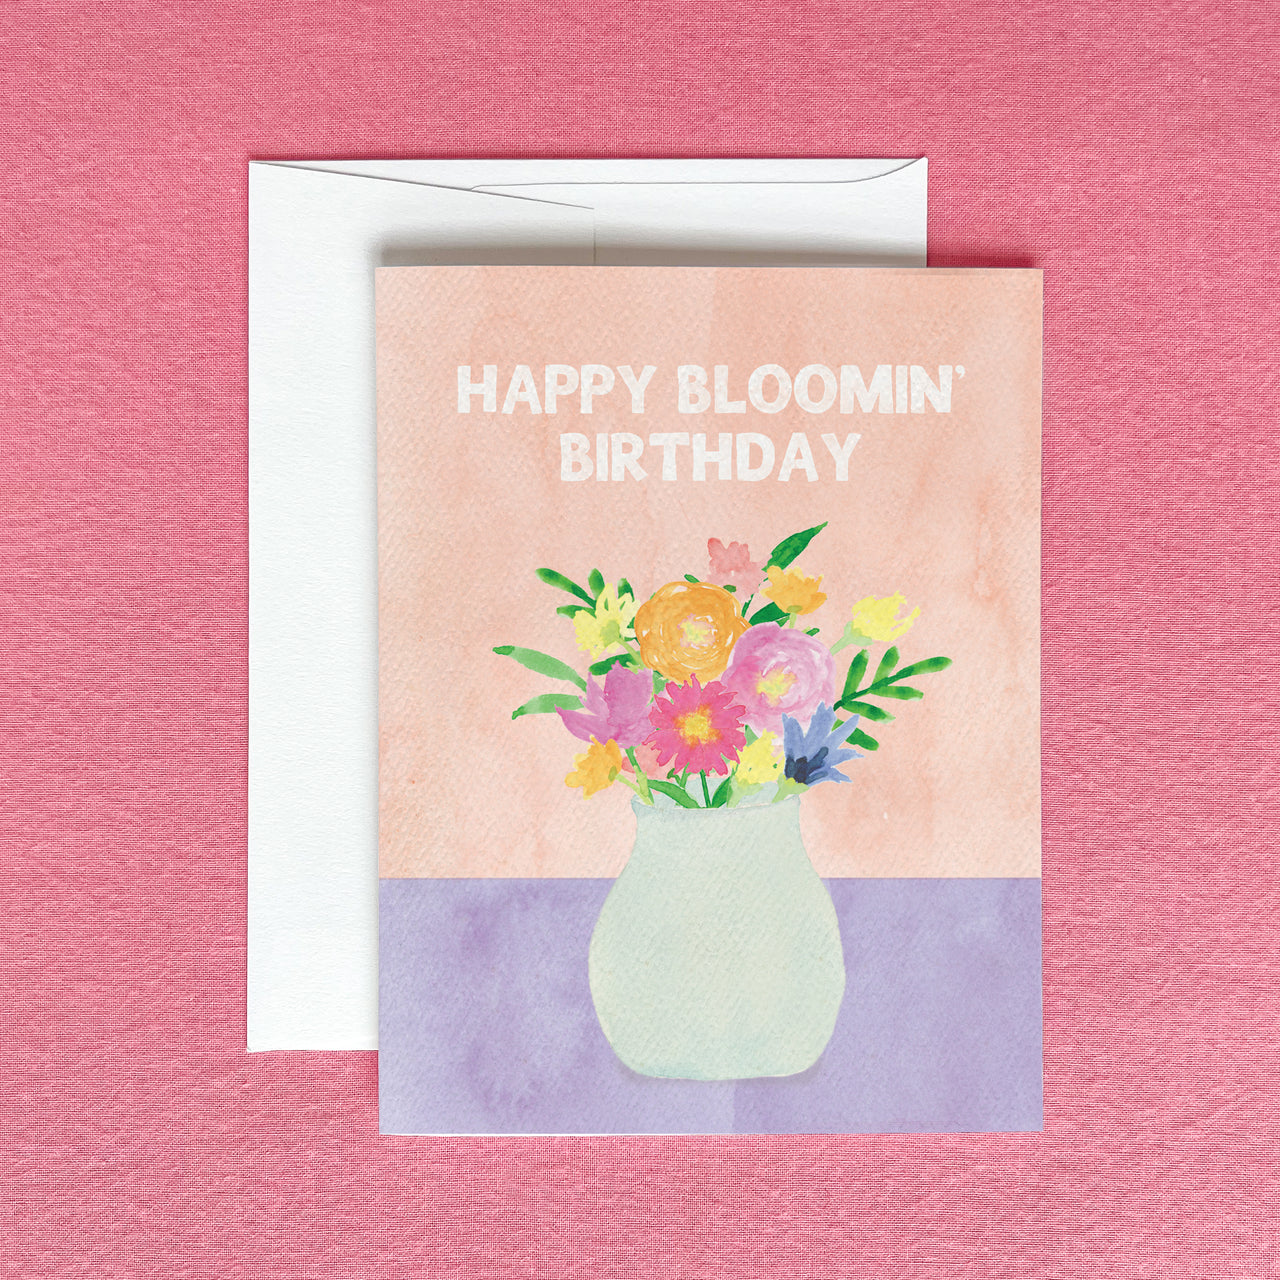 Happy Bloomin' Birthday Greeting Card by Gert & Co